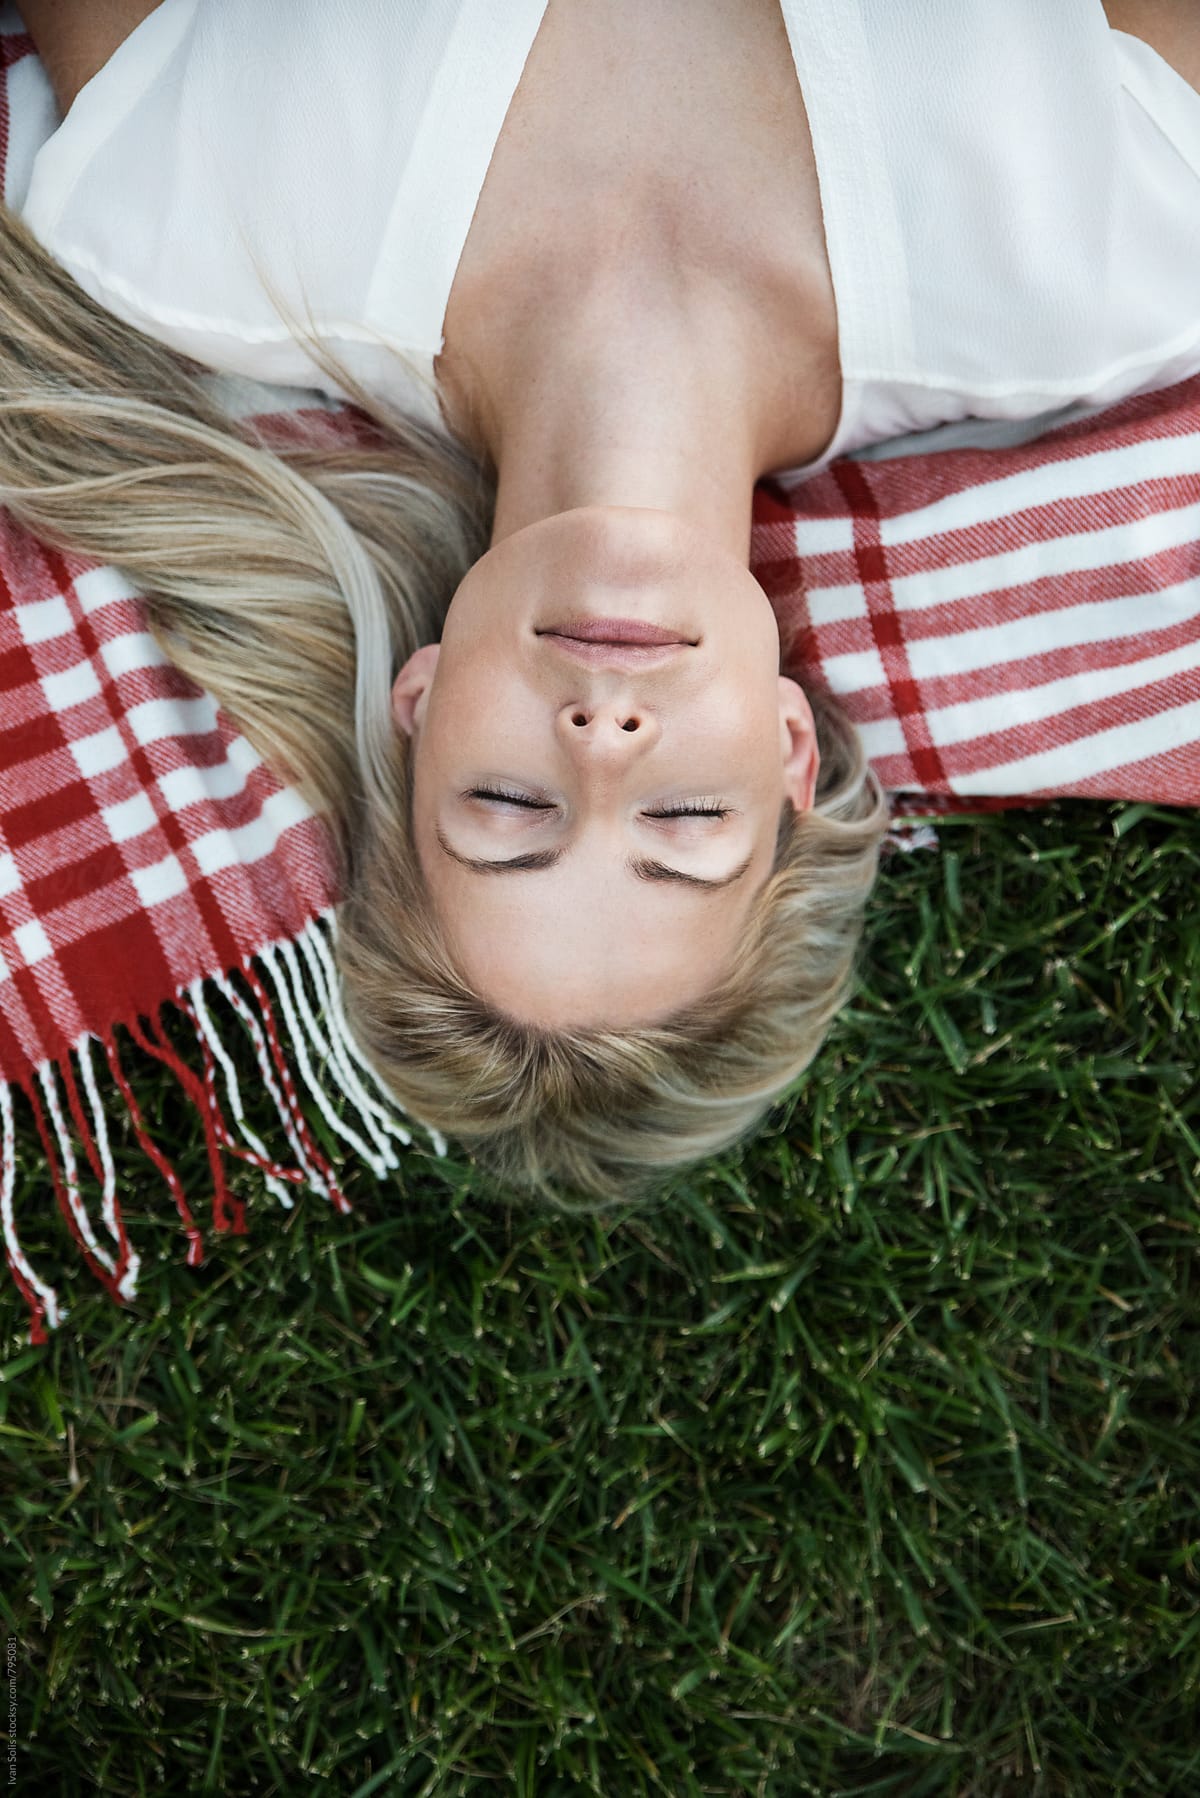 Woman Lying On The Grass By Stocksy Contributor Ivan Solis Stocksy